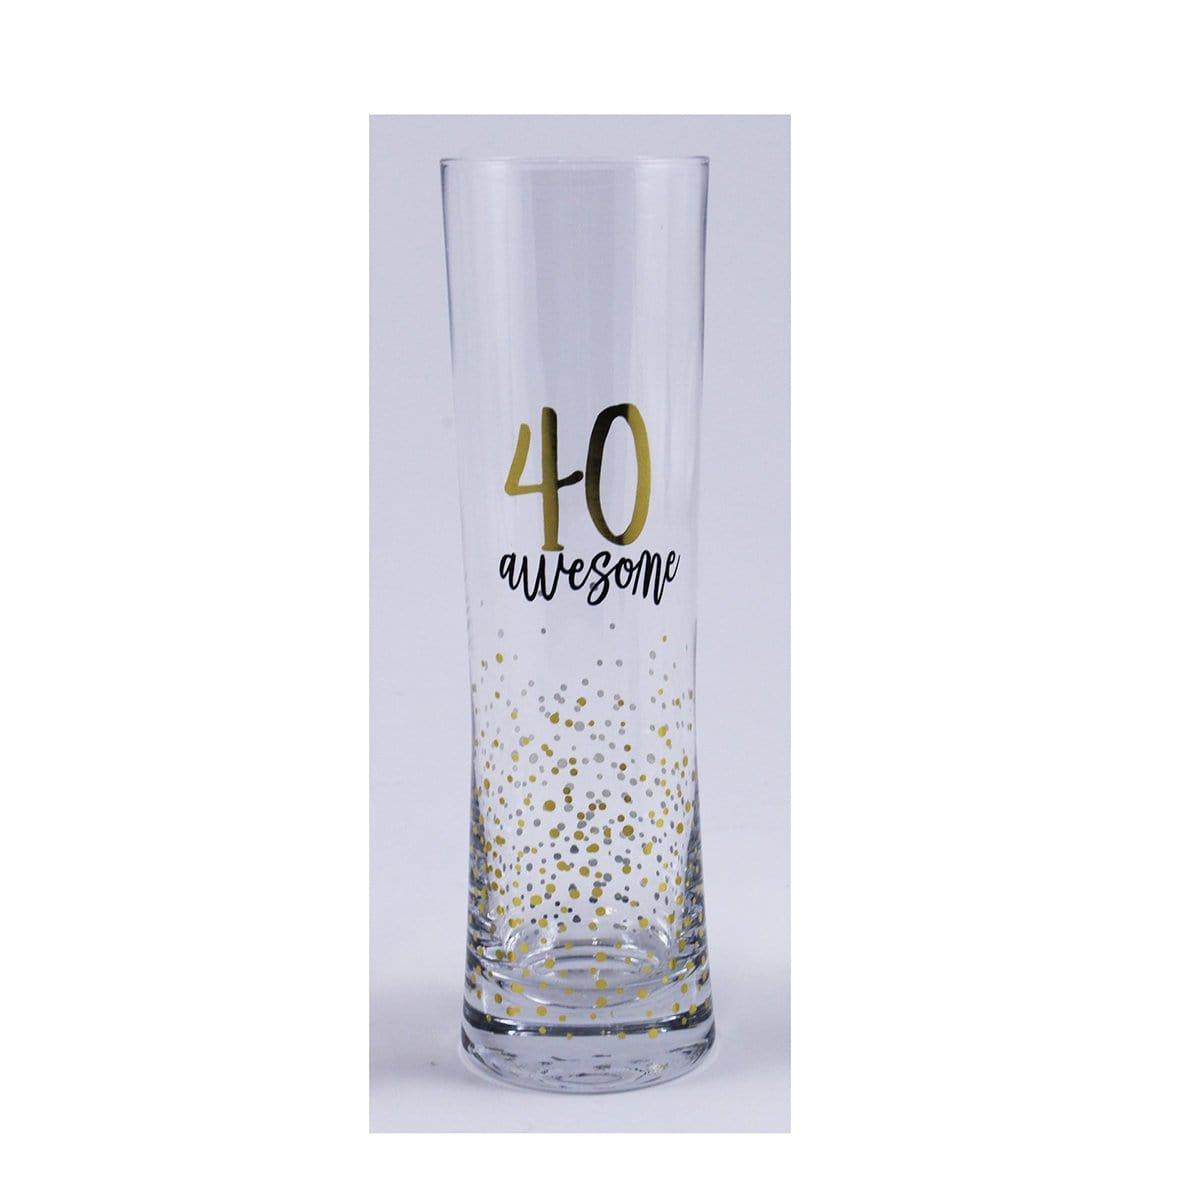 Buy Age Specific Birthday Beer Glass - 40 Awesome sold at Party Expert